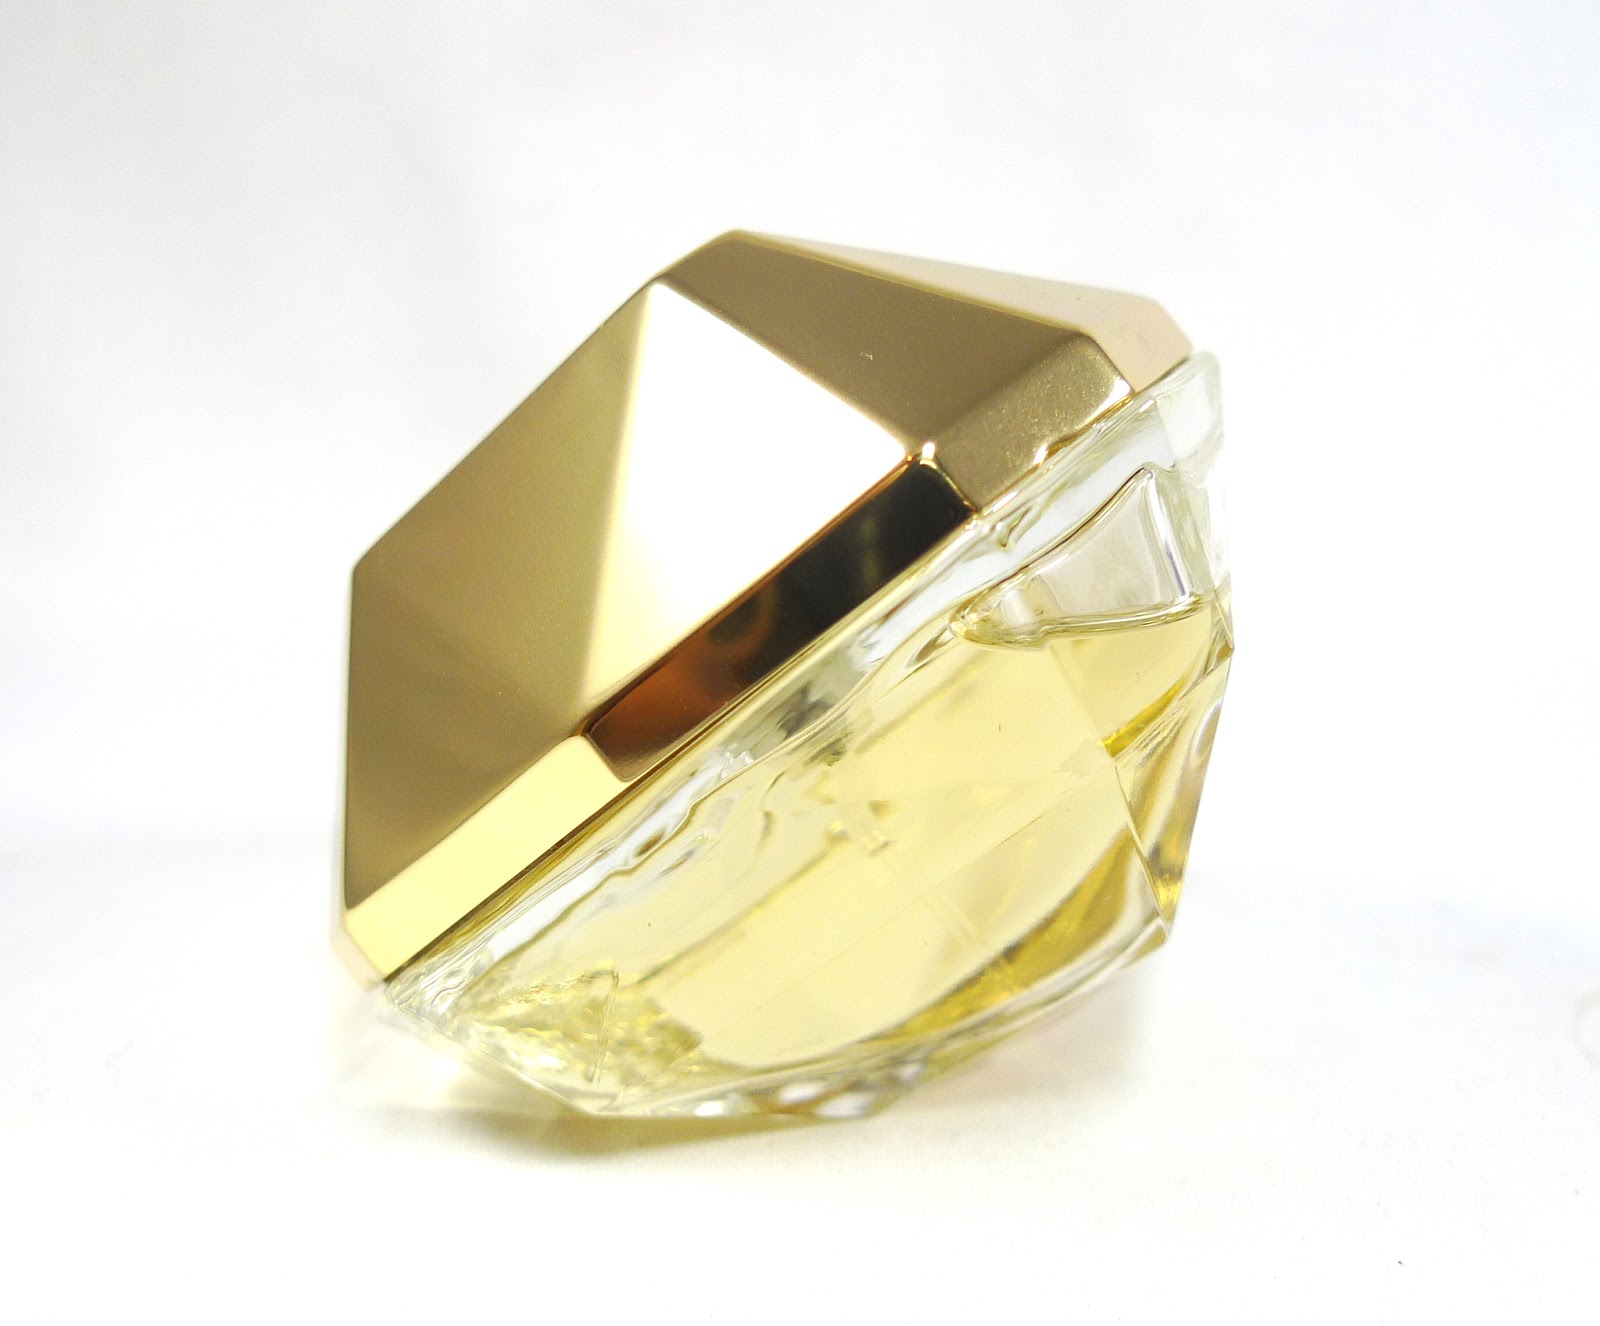 Review: Paco Rabanne Lady Million EDT